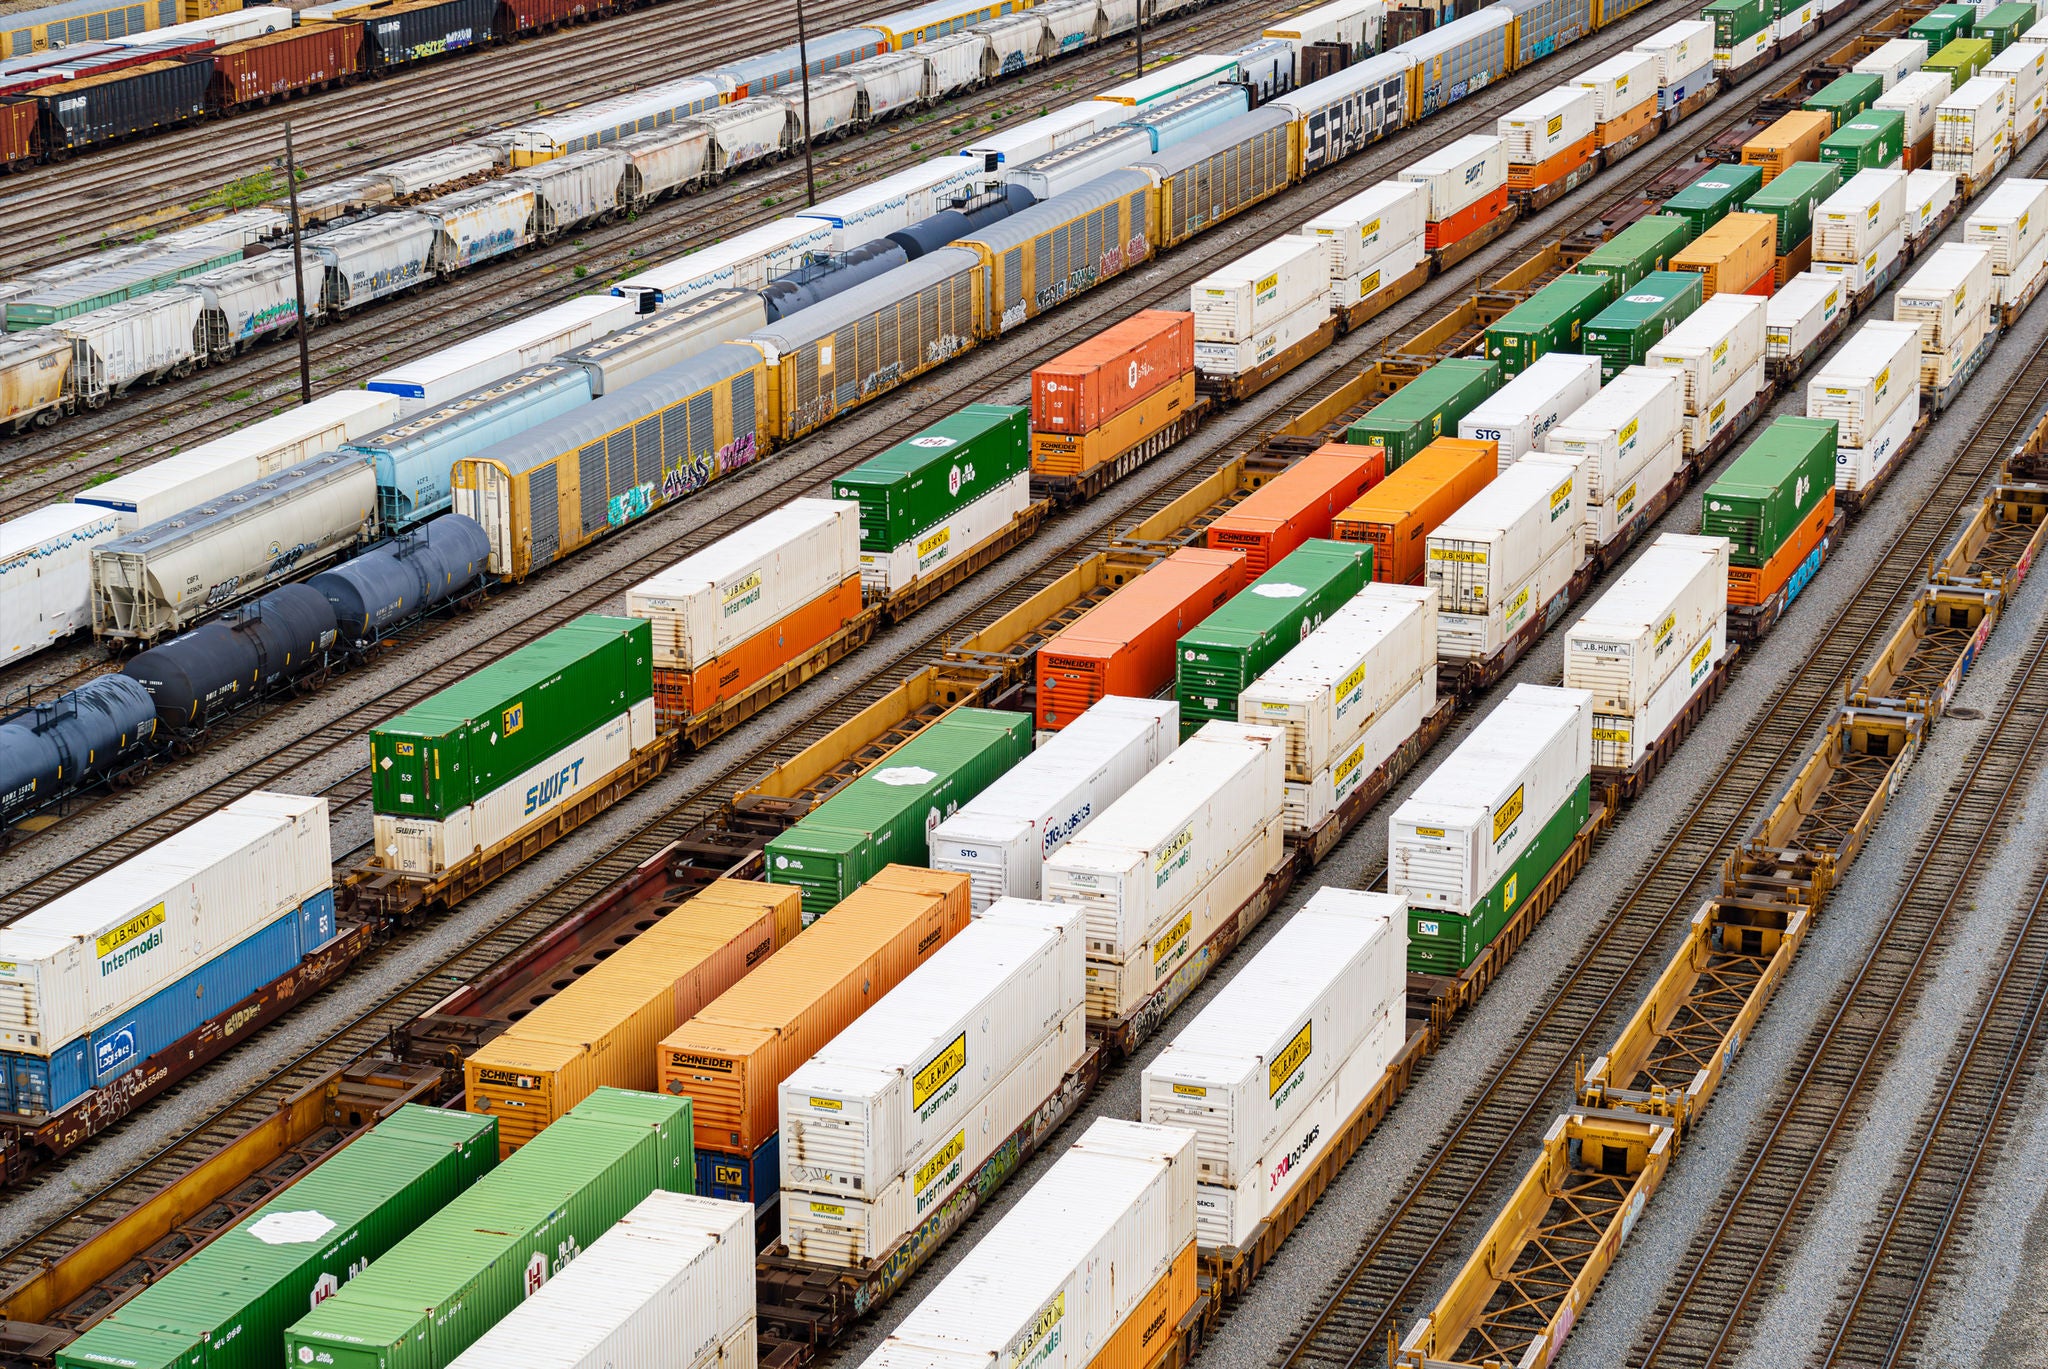 Aerial view of multiple transportation industry rail shipping containers on railroad track